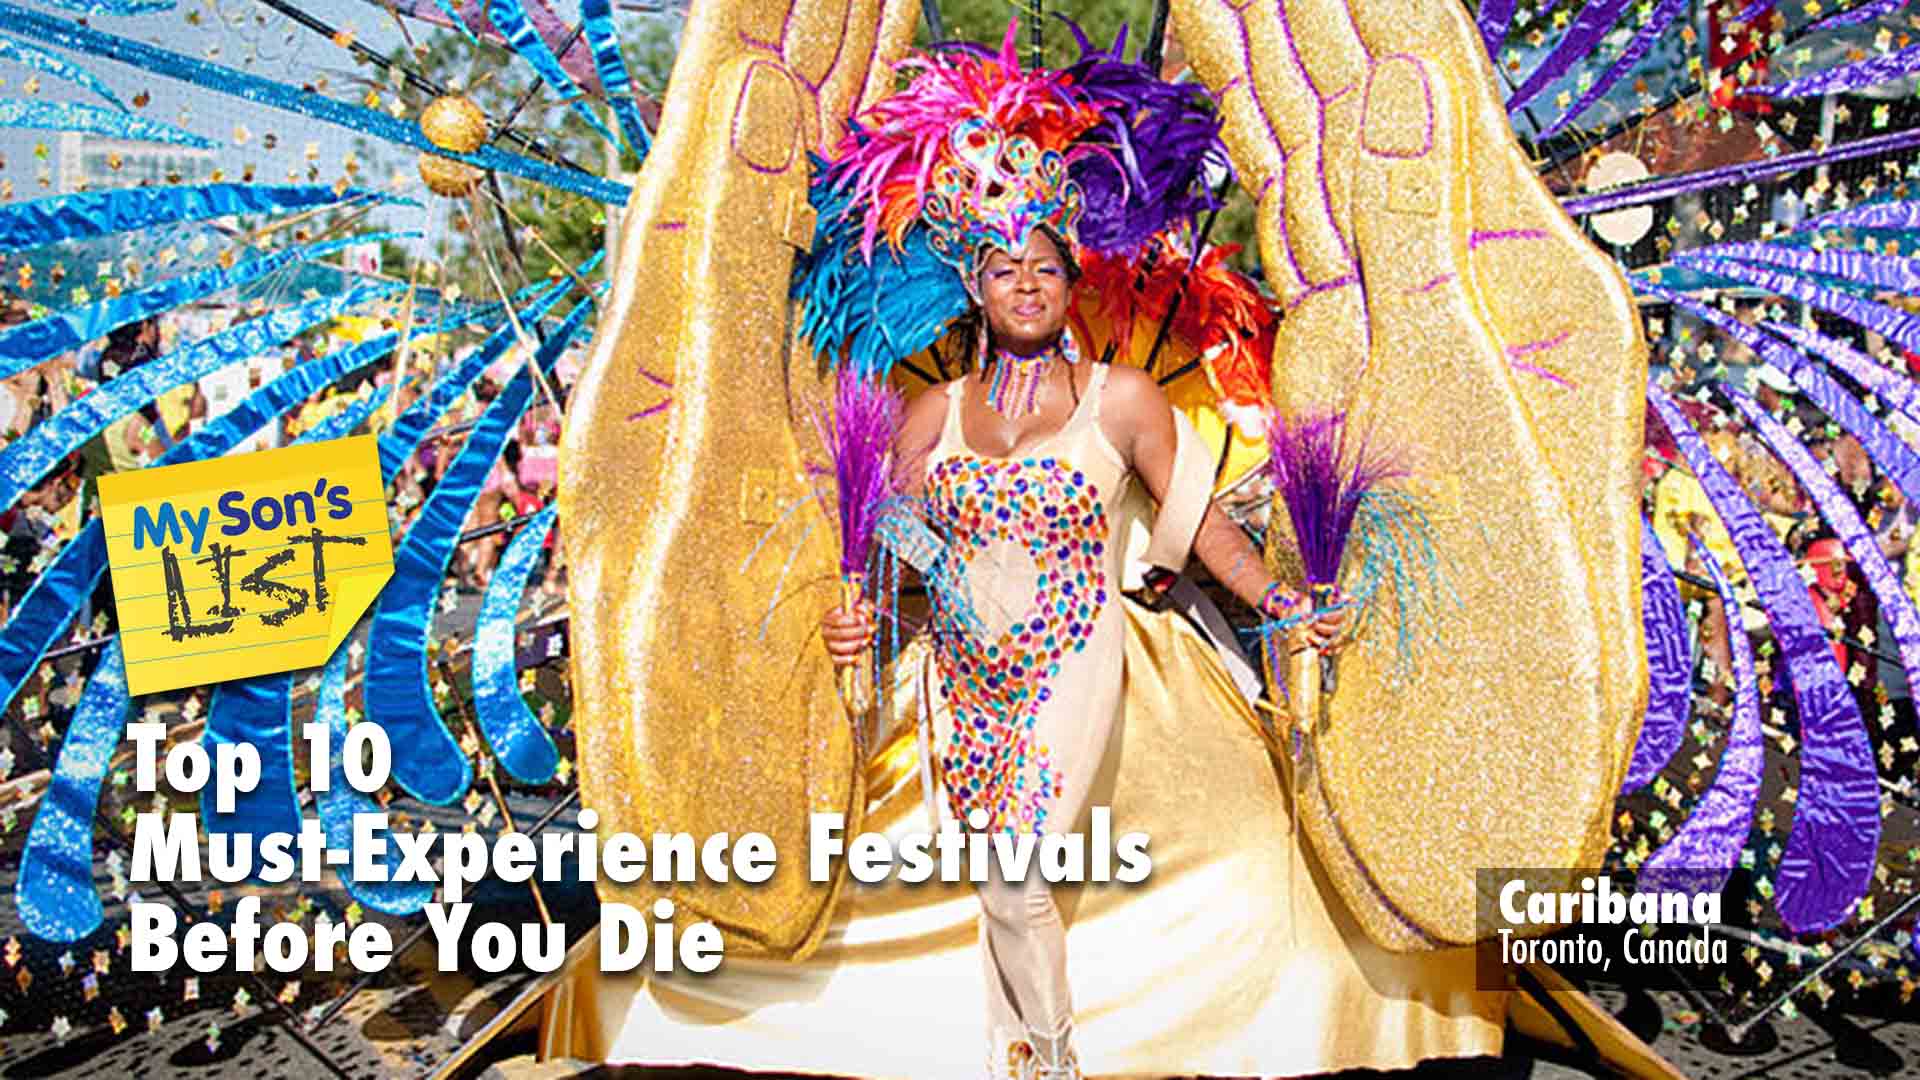 Top 10 Must-Experience Festivals Before You Die